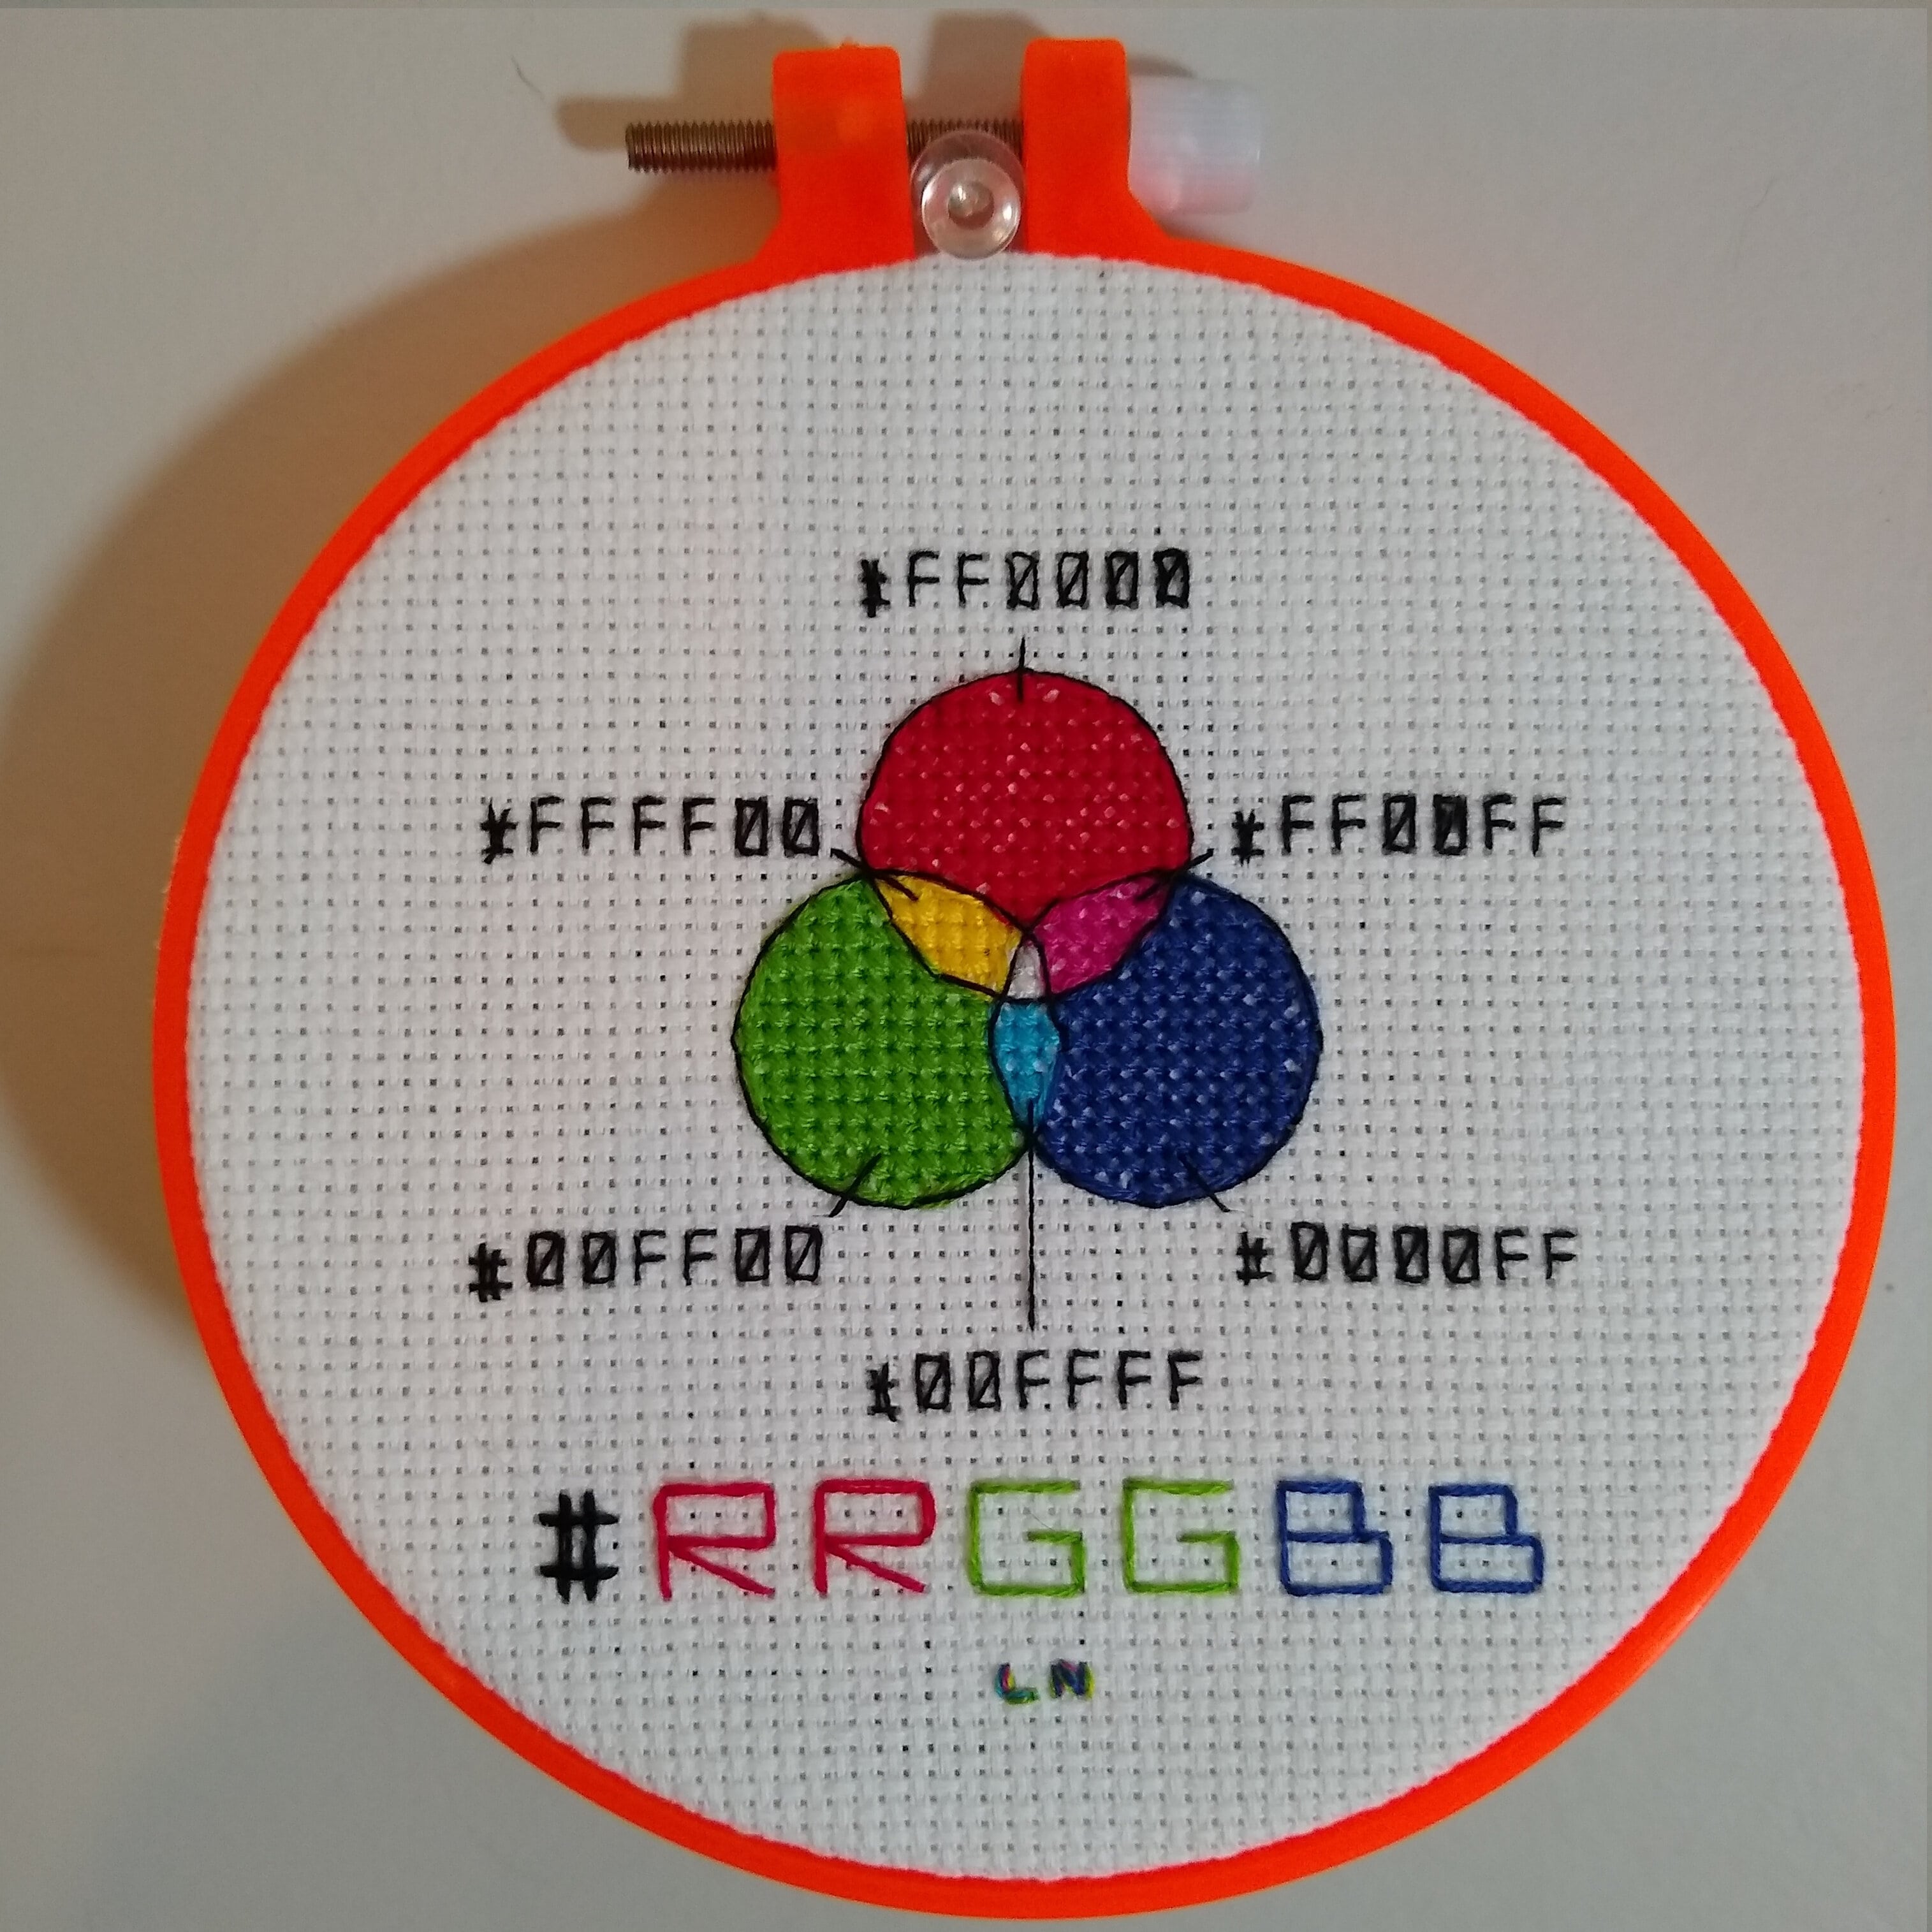 cross-stitch of a diagram of additive colors. The colors are labeled with hexacode values.